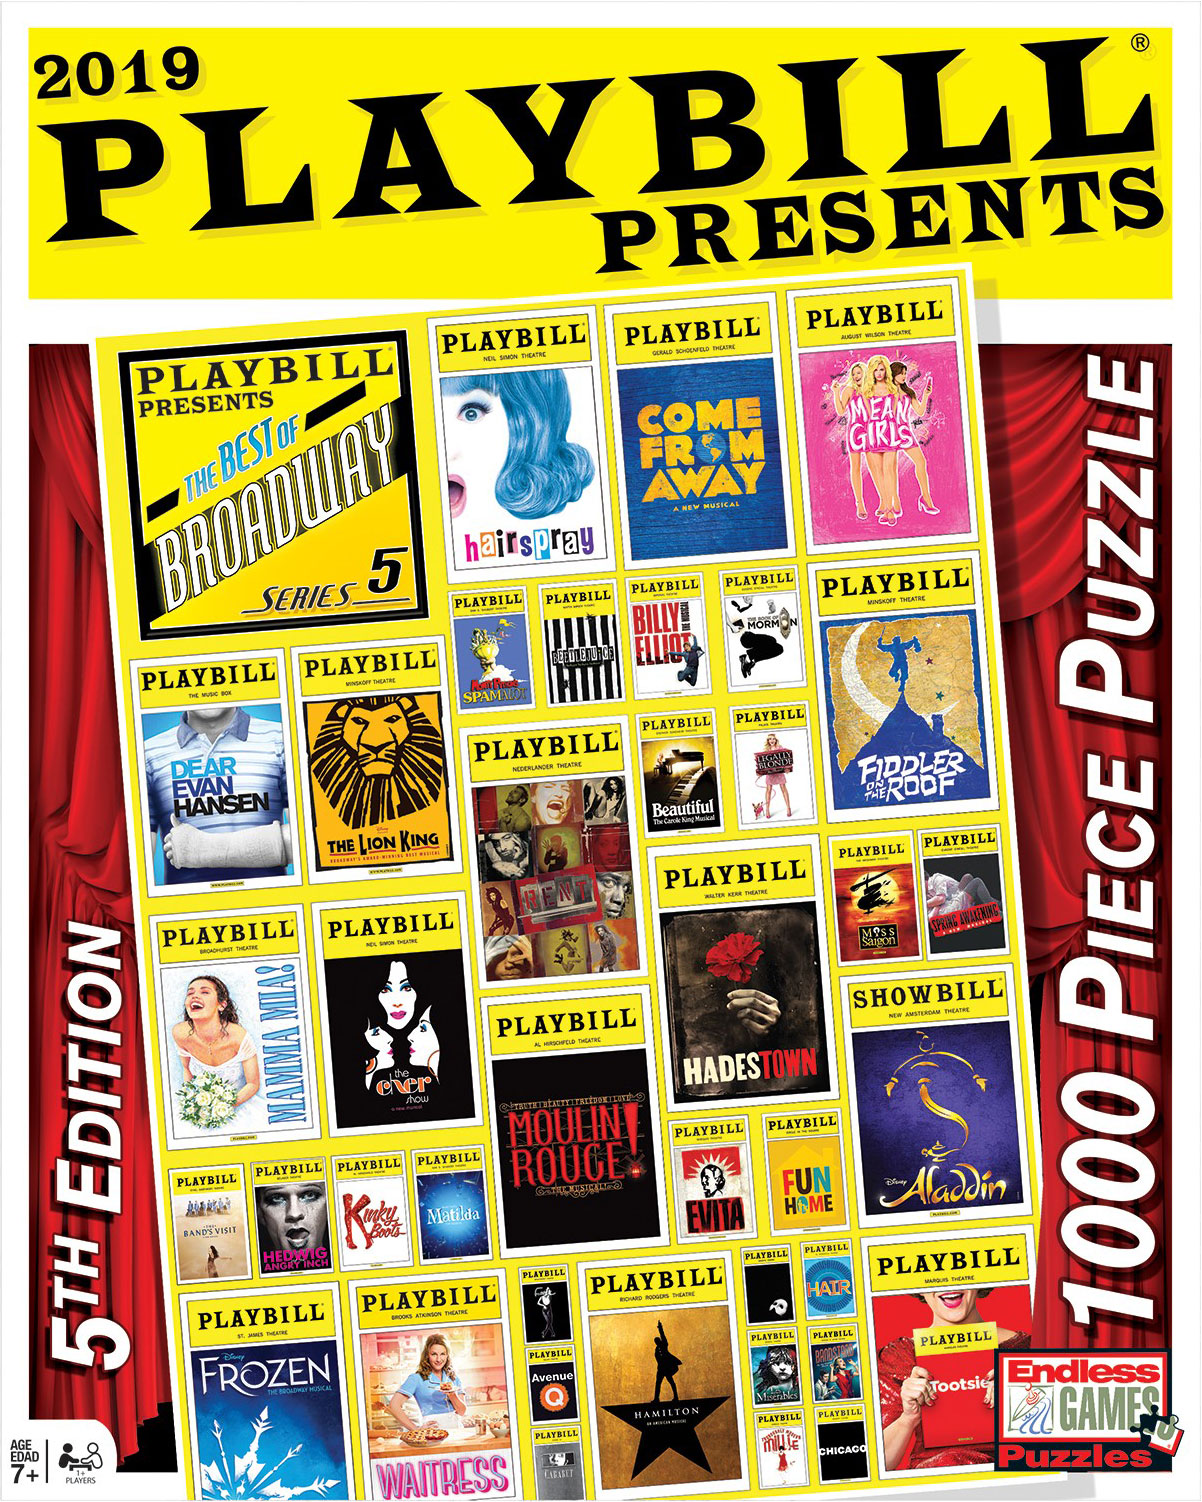 Playbill Presents the Best of Broadway Series 5 - 1,000 Piece Jigsaw Puzzle